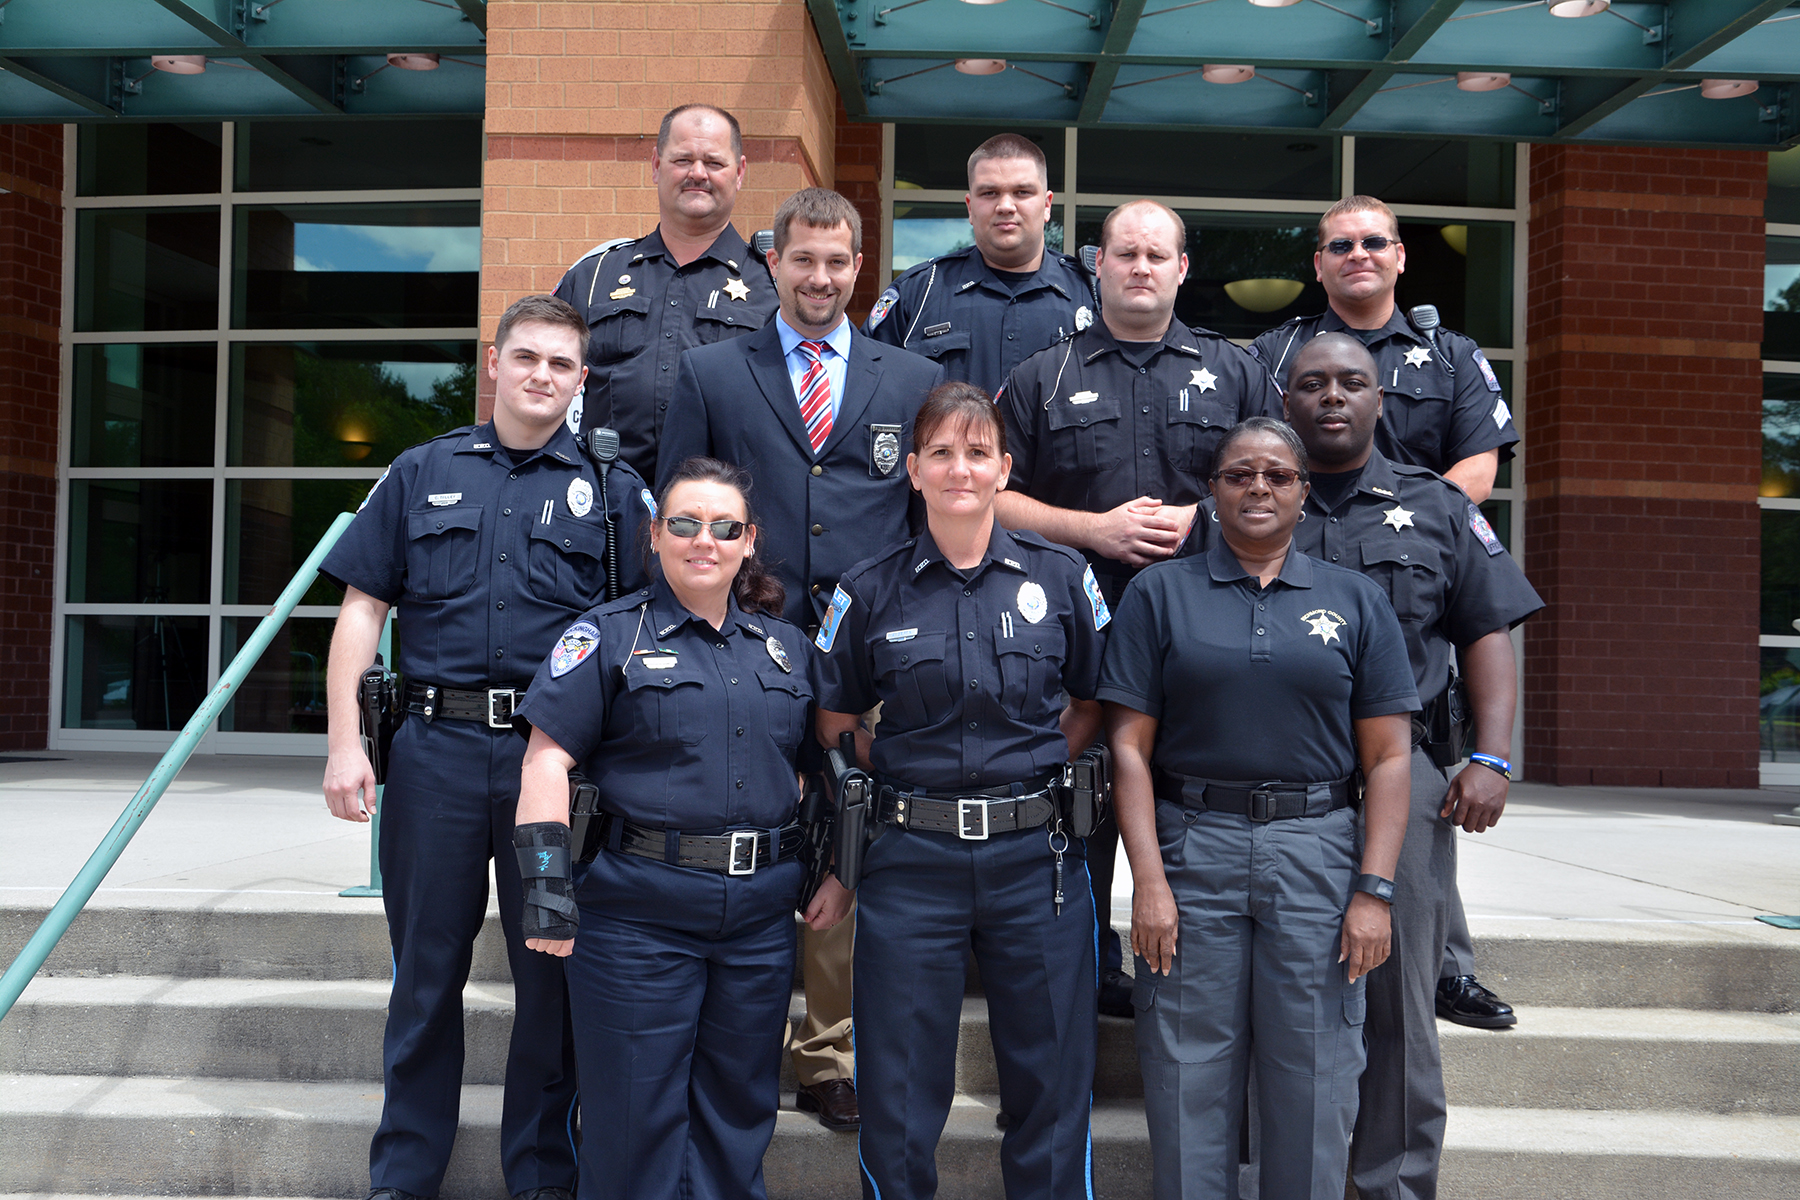 Pictured are the 10 law enforcement officers who completed Crisis Intervention Team training at Richmond Community College: in front, from left, Jan Owens, Anne Griffin and Candy Gunnings; second row, from left, Charles Talley, Det. Eric Culbreth, Det. Phillip Davis and Brian Ingram; in back, from left, Lt. Clyde Smith, James Hooks and Sgt. Cory Jones.